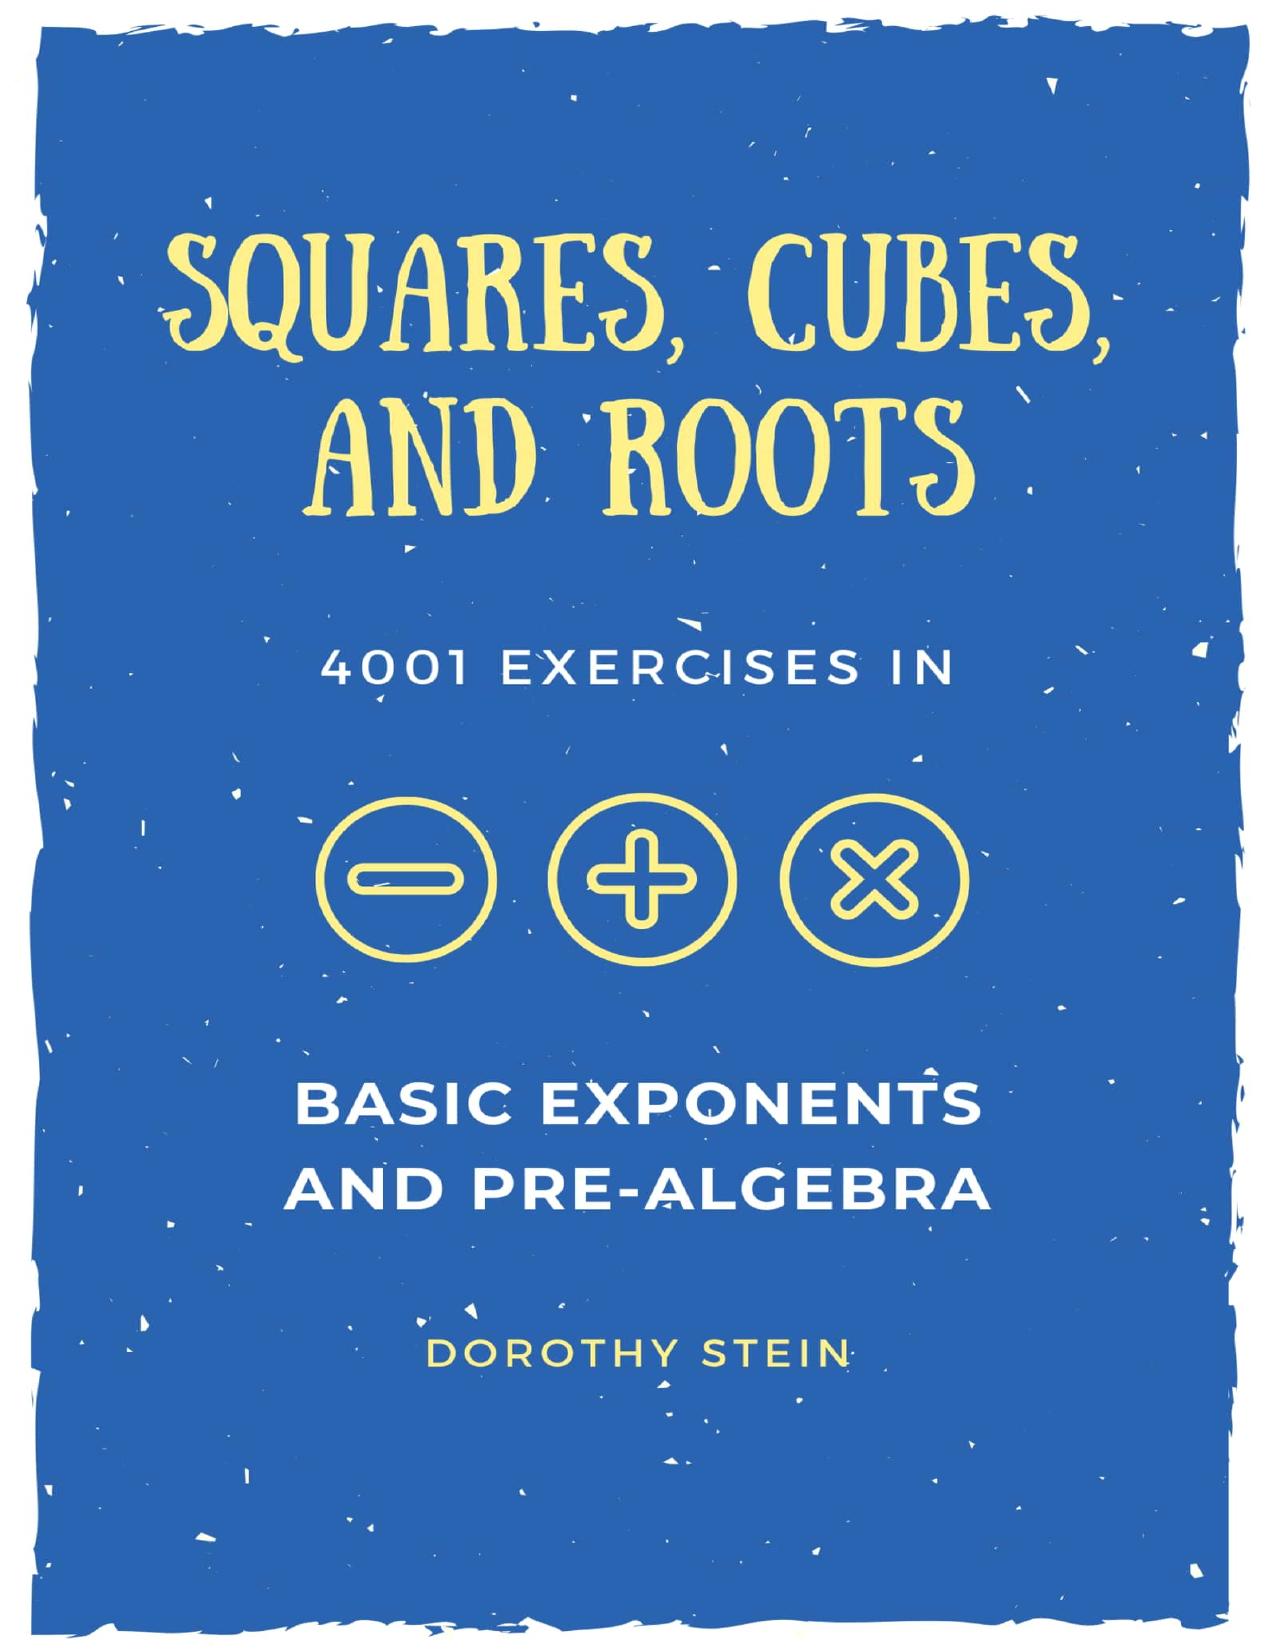 Squares, Cubes, and Roots: 4001 exercises in Basic Exponents and Pre-Algebra by Dorothy Stein